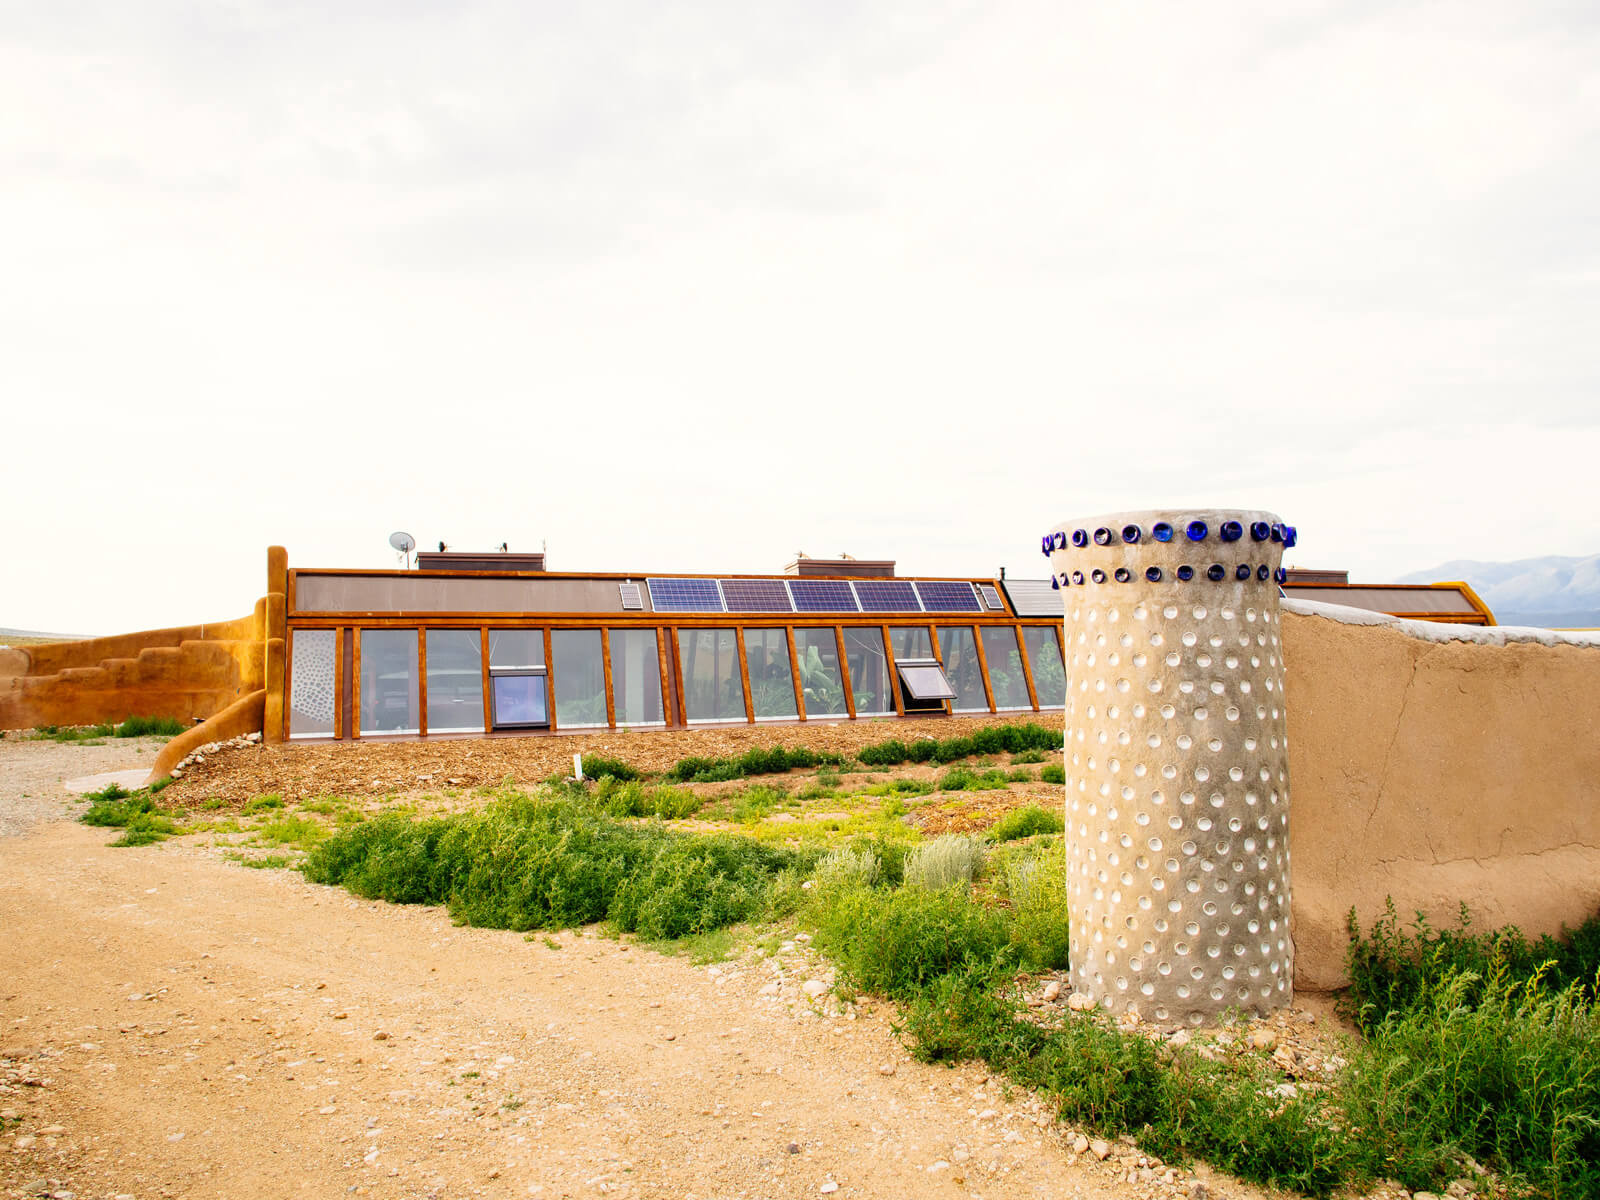 Waybee Earthship in New Mexico utilizing solar gain and thermal mass in its sustainable design